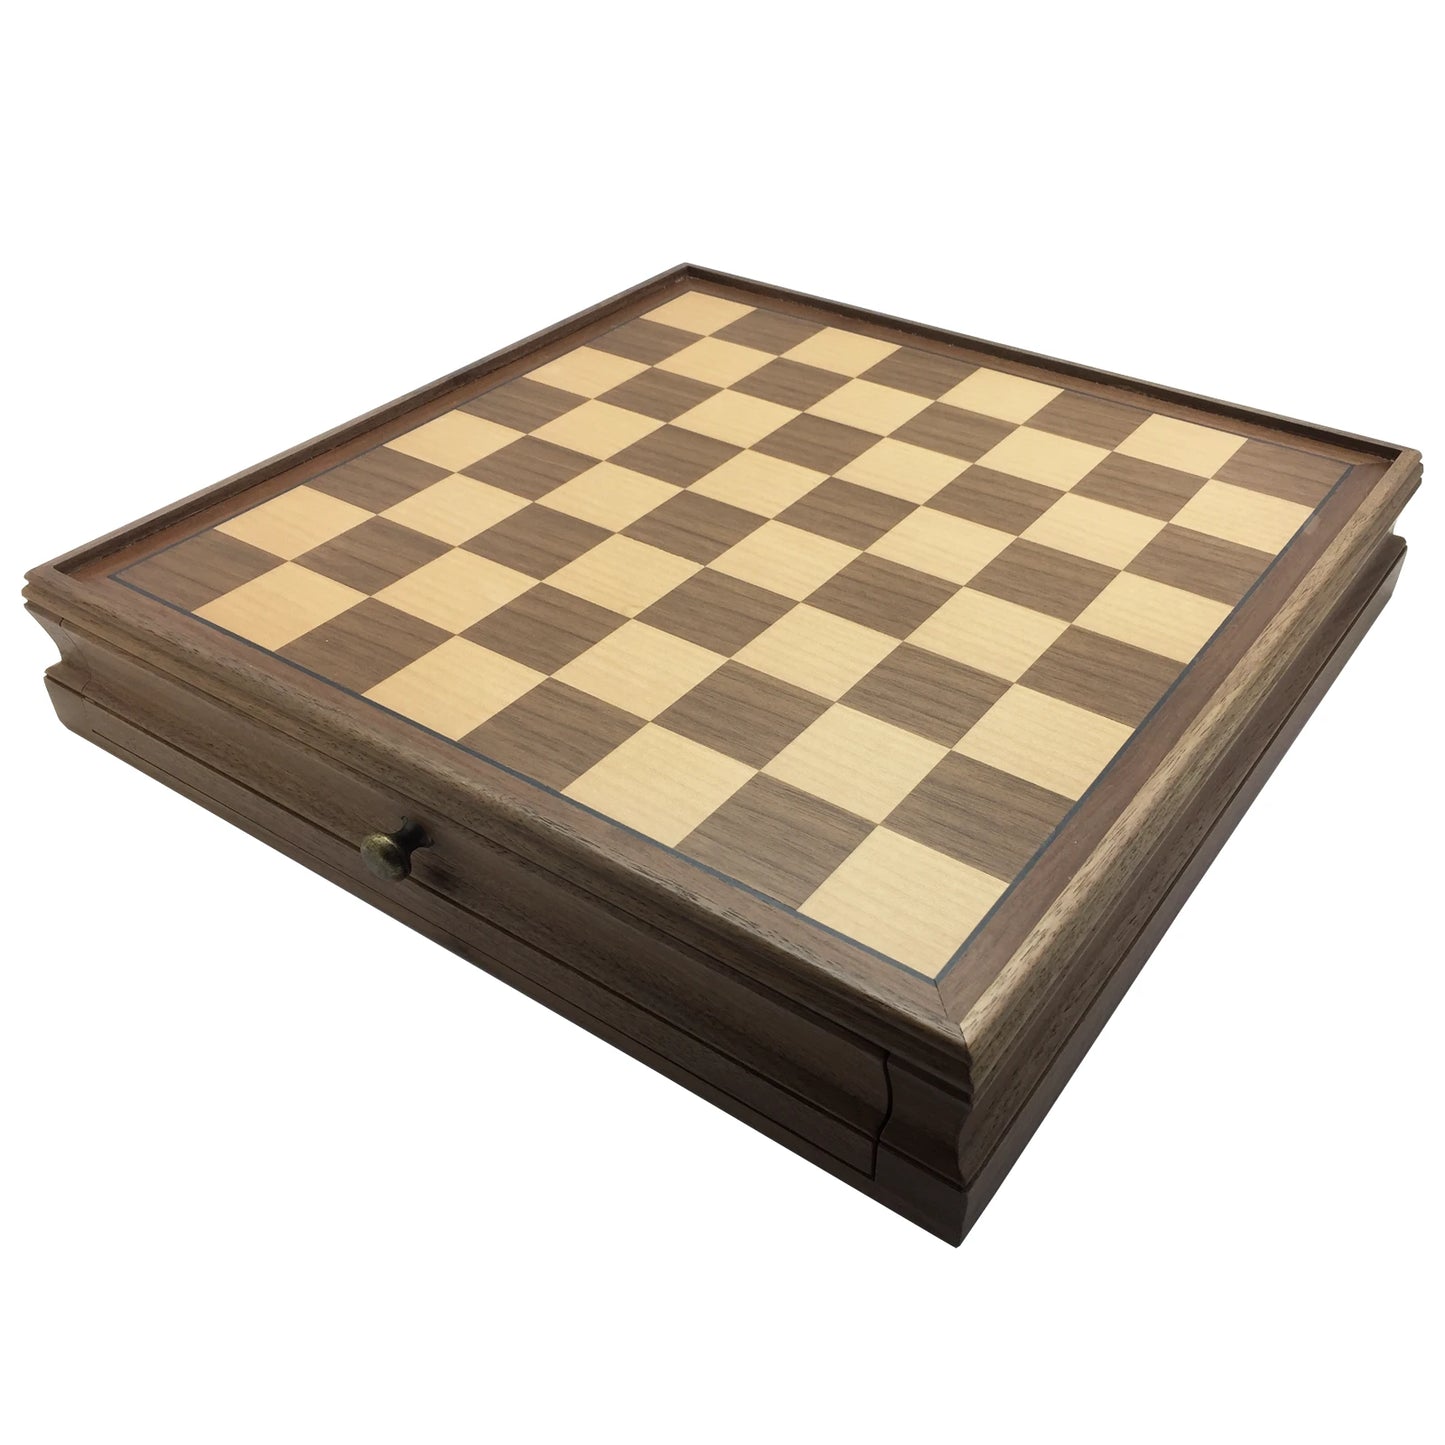 Wood chess set board with drawers.